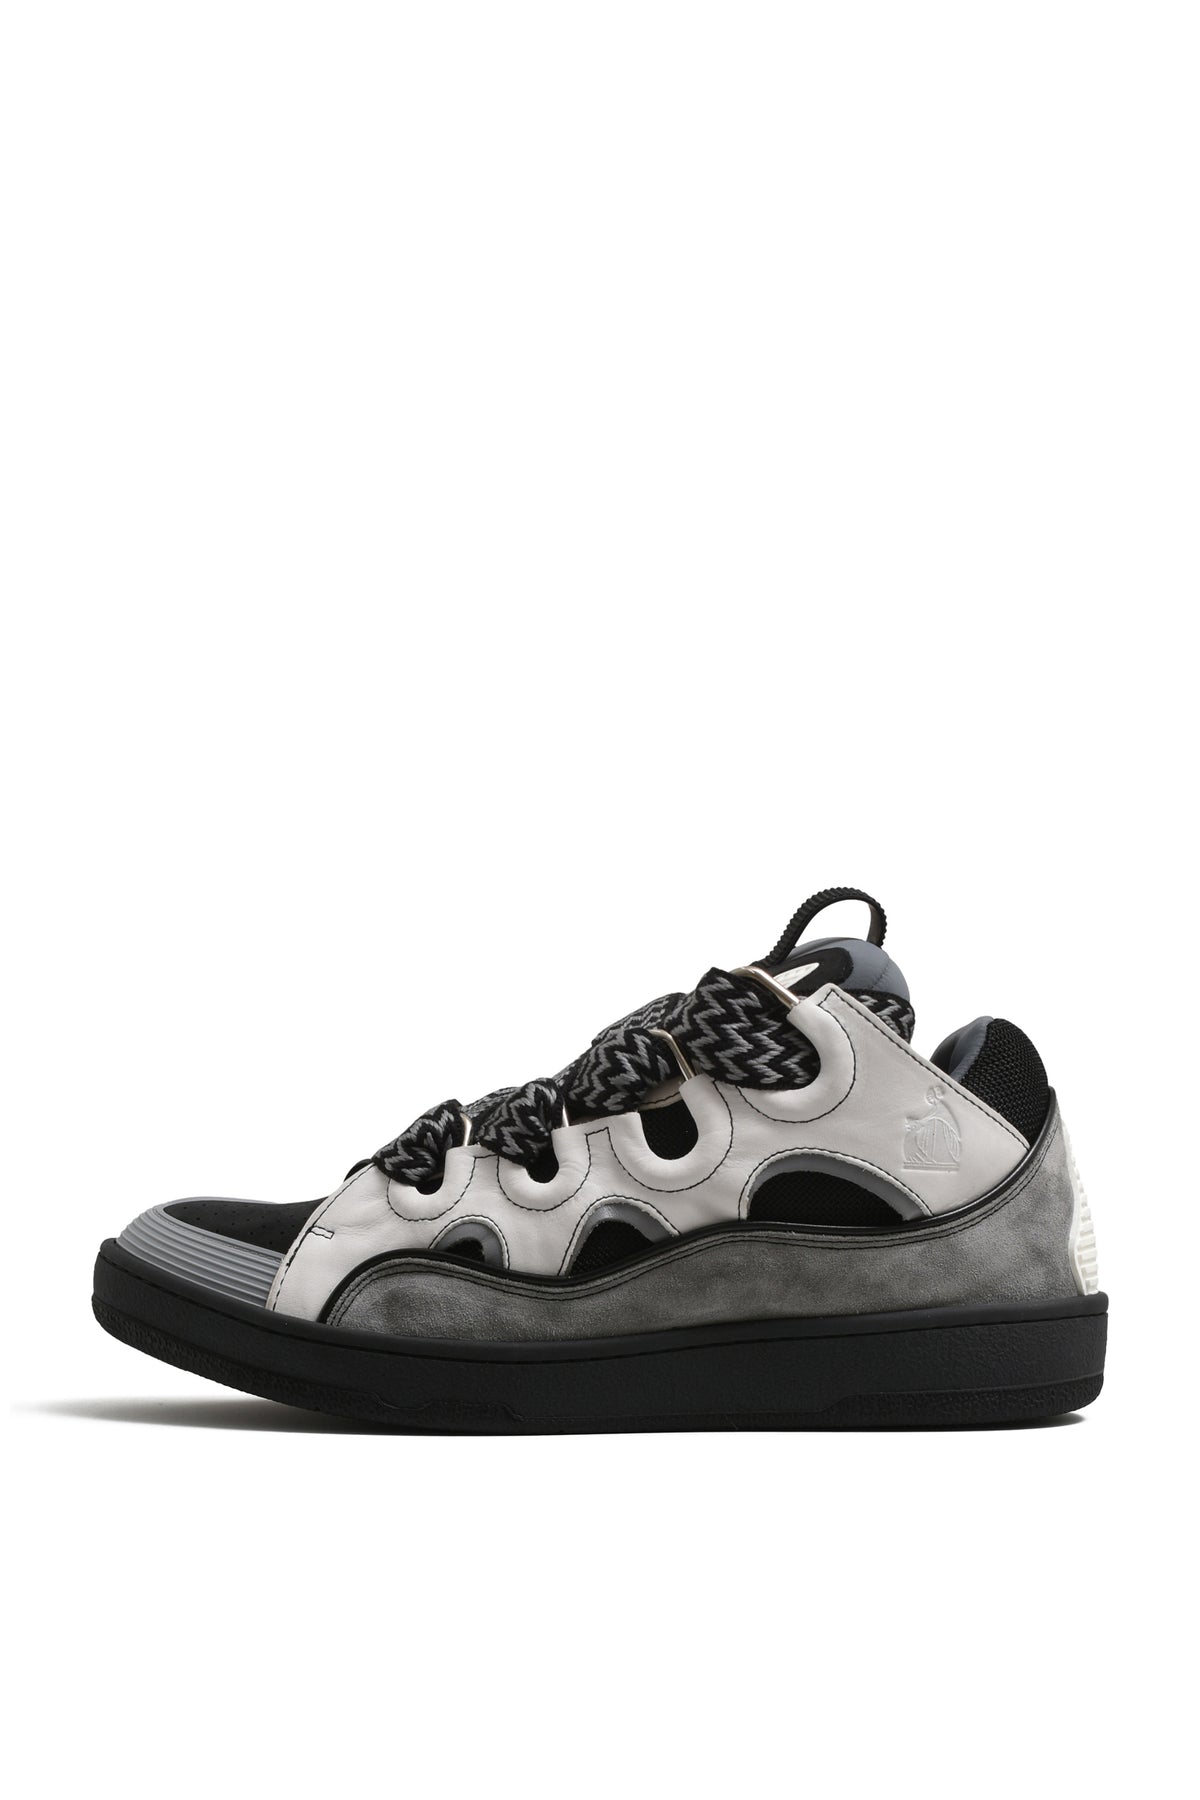 CURB SNEAKERS / BLK WHT